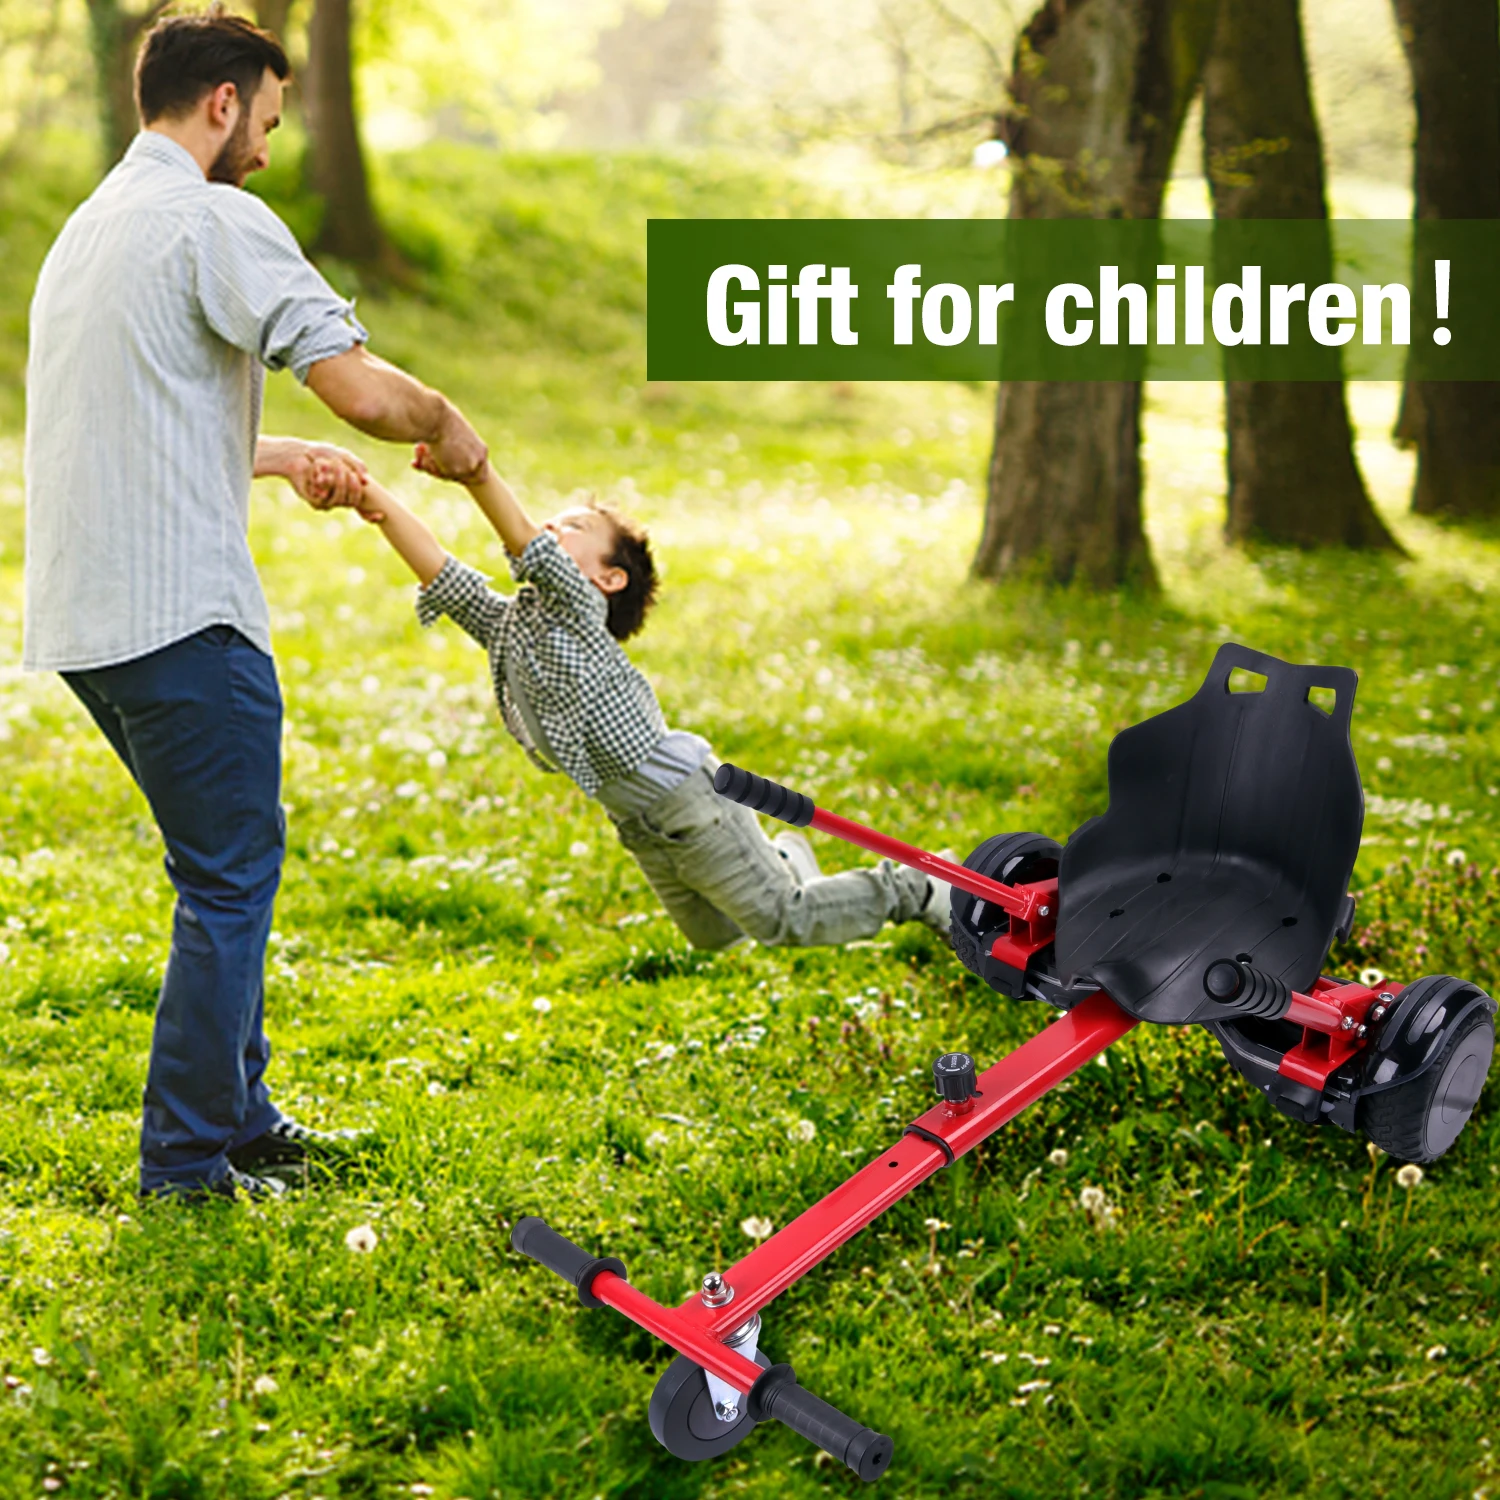 Hoverkart fit electric scooter ，Gift for Children-KT GeekMe Hoverkart，Self Balance Scooter Accessory